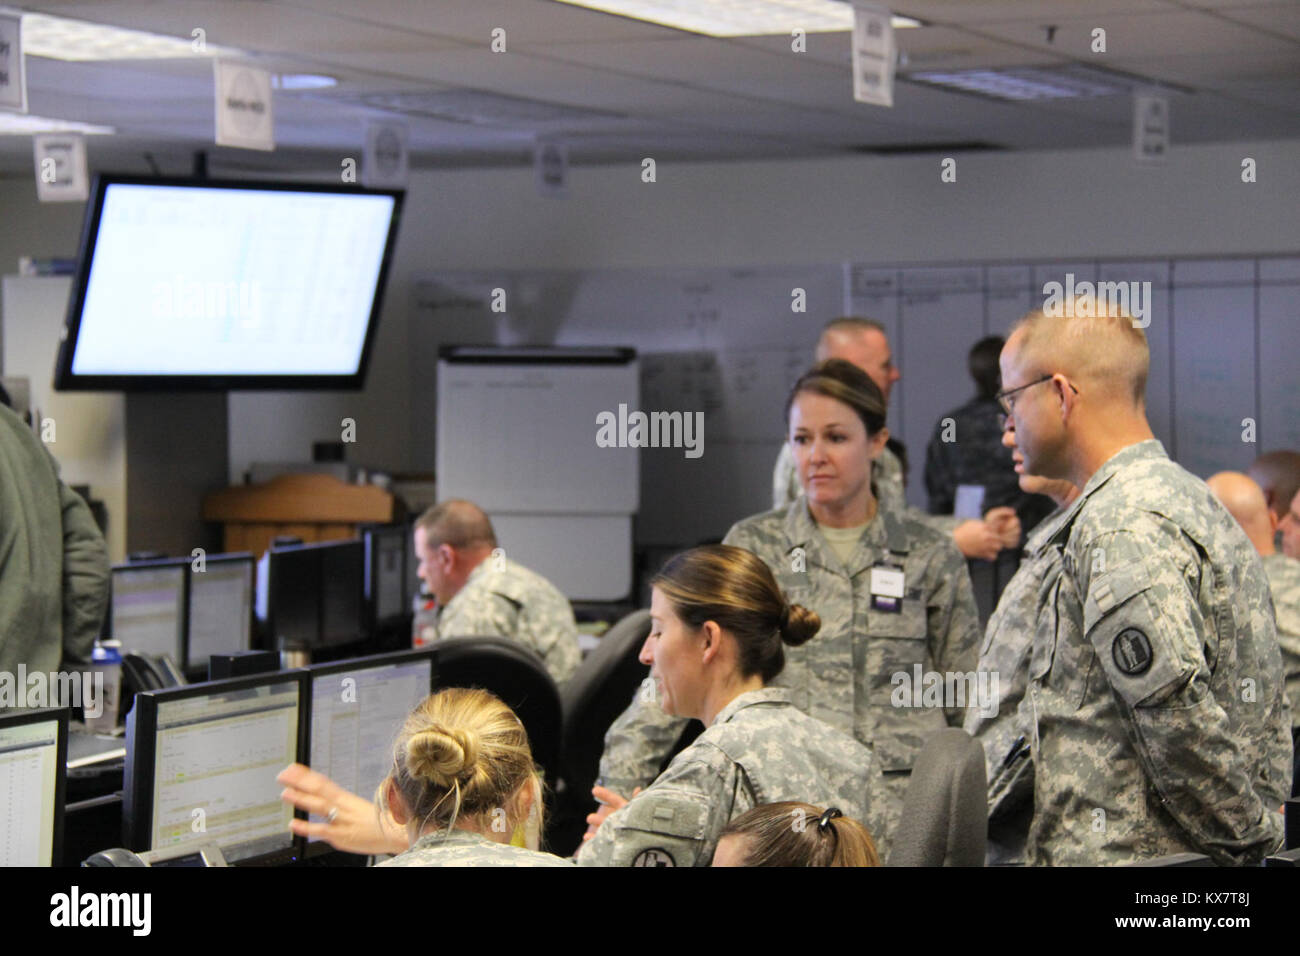 Members of the Utah National Guard participate in the Joint Operations Center as part of training exercise Vigilant Guard Utah 2014, #VGUT14,  at the Utah National Guard Headquarters in Draper, Utah Nov. 2, 2014. Stock Photo